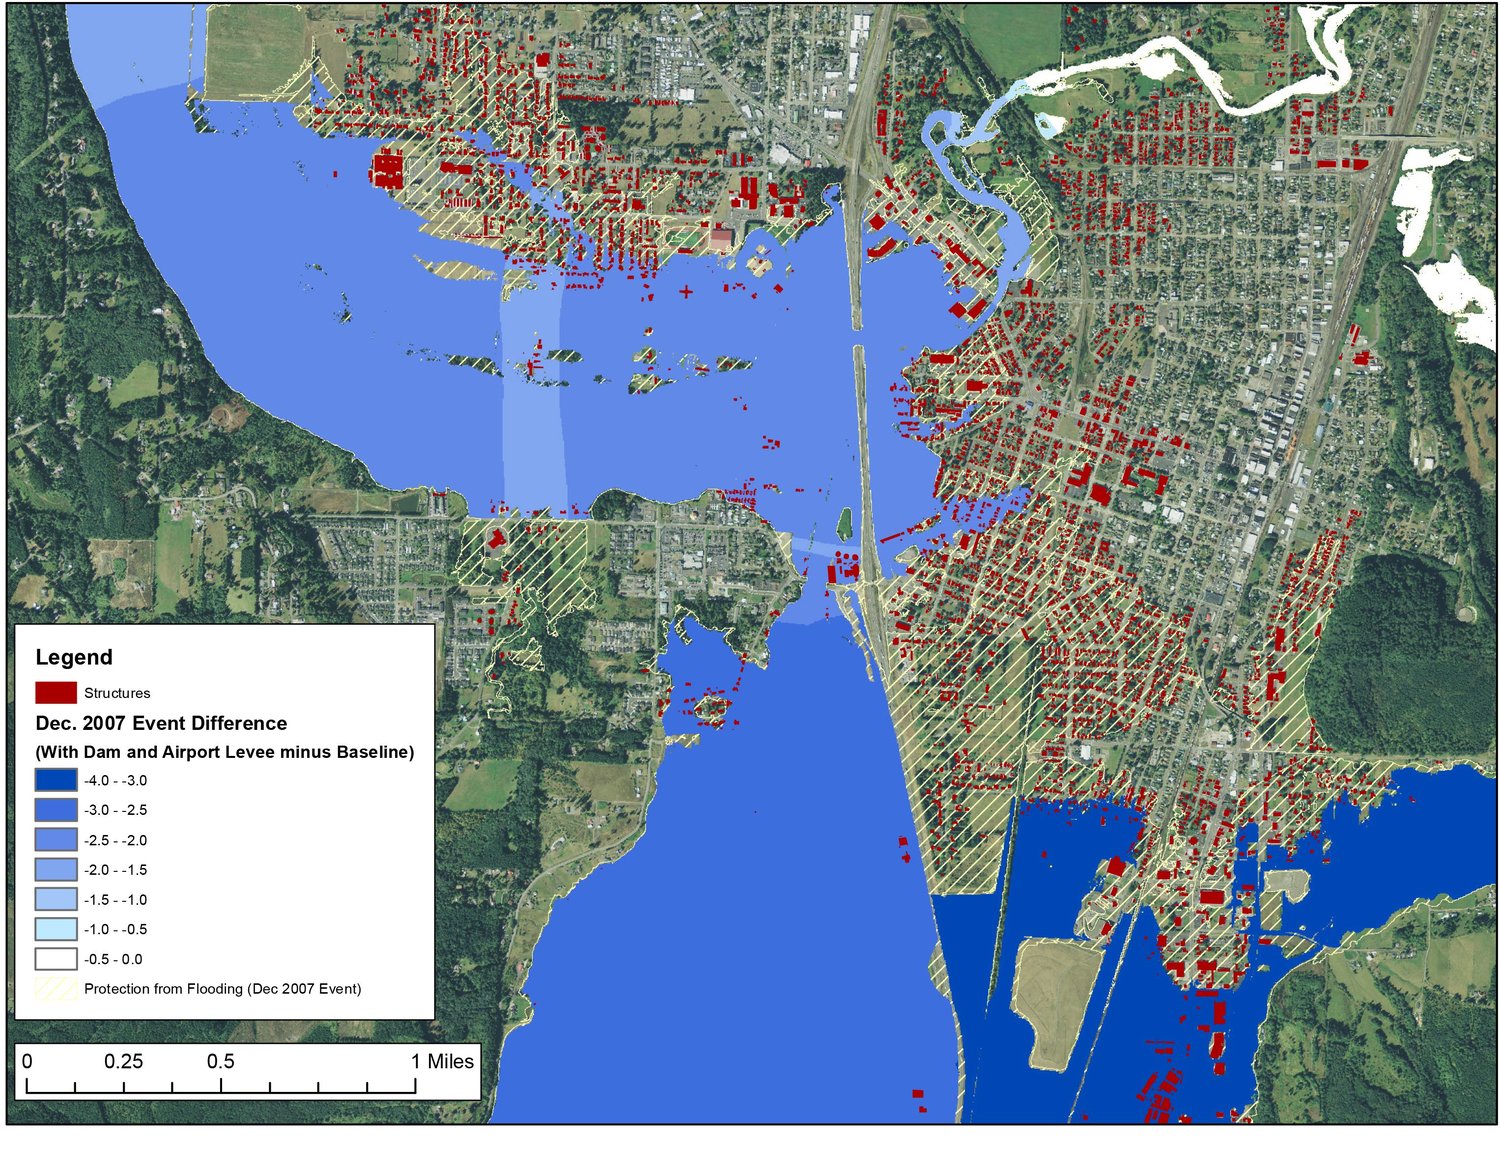 This image included in the draft Environmental Impact Statement for the proposed Chehalis River dam shows areas that could be spared serious flooding during an event comparable to the 2007 flood.